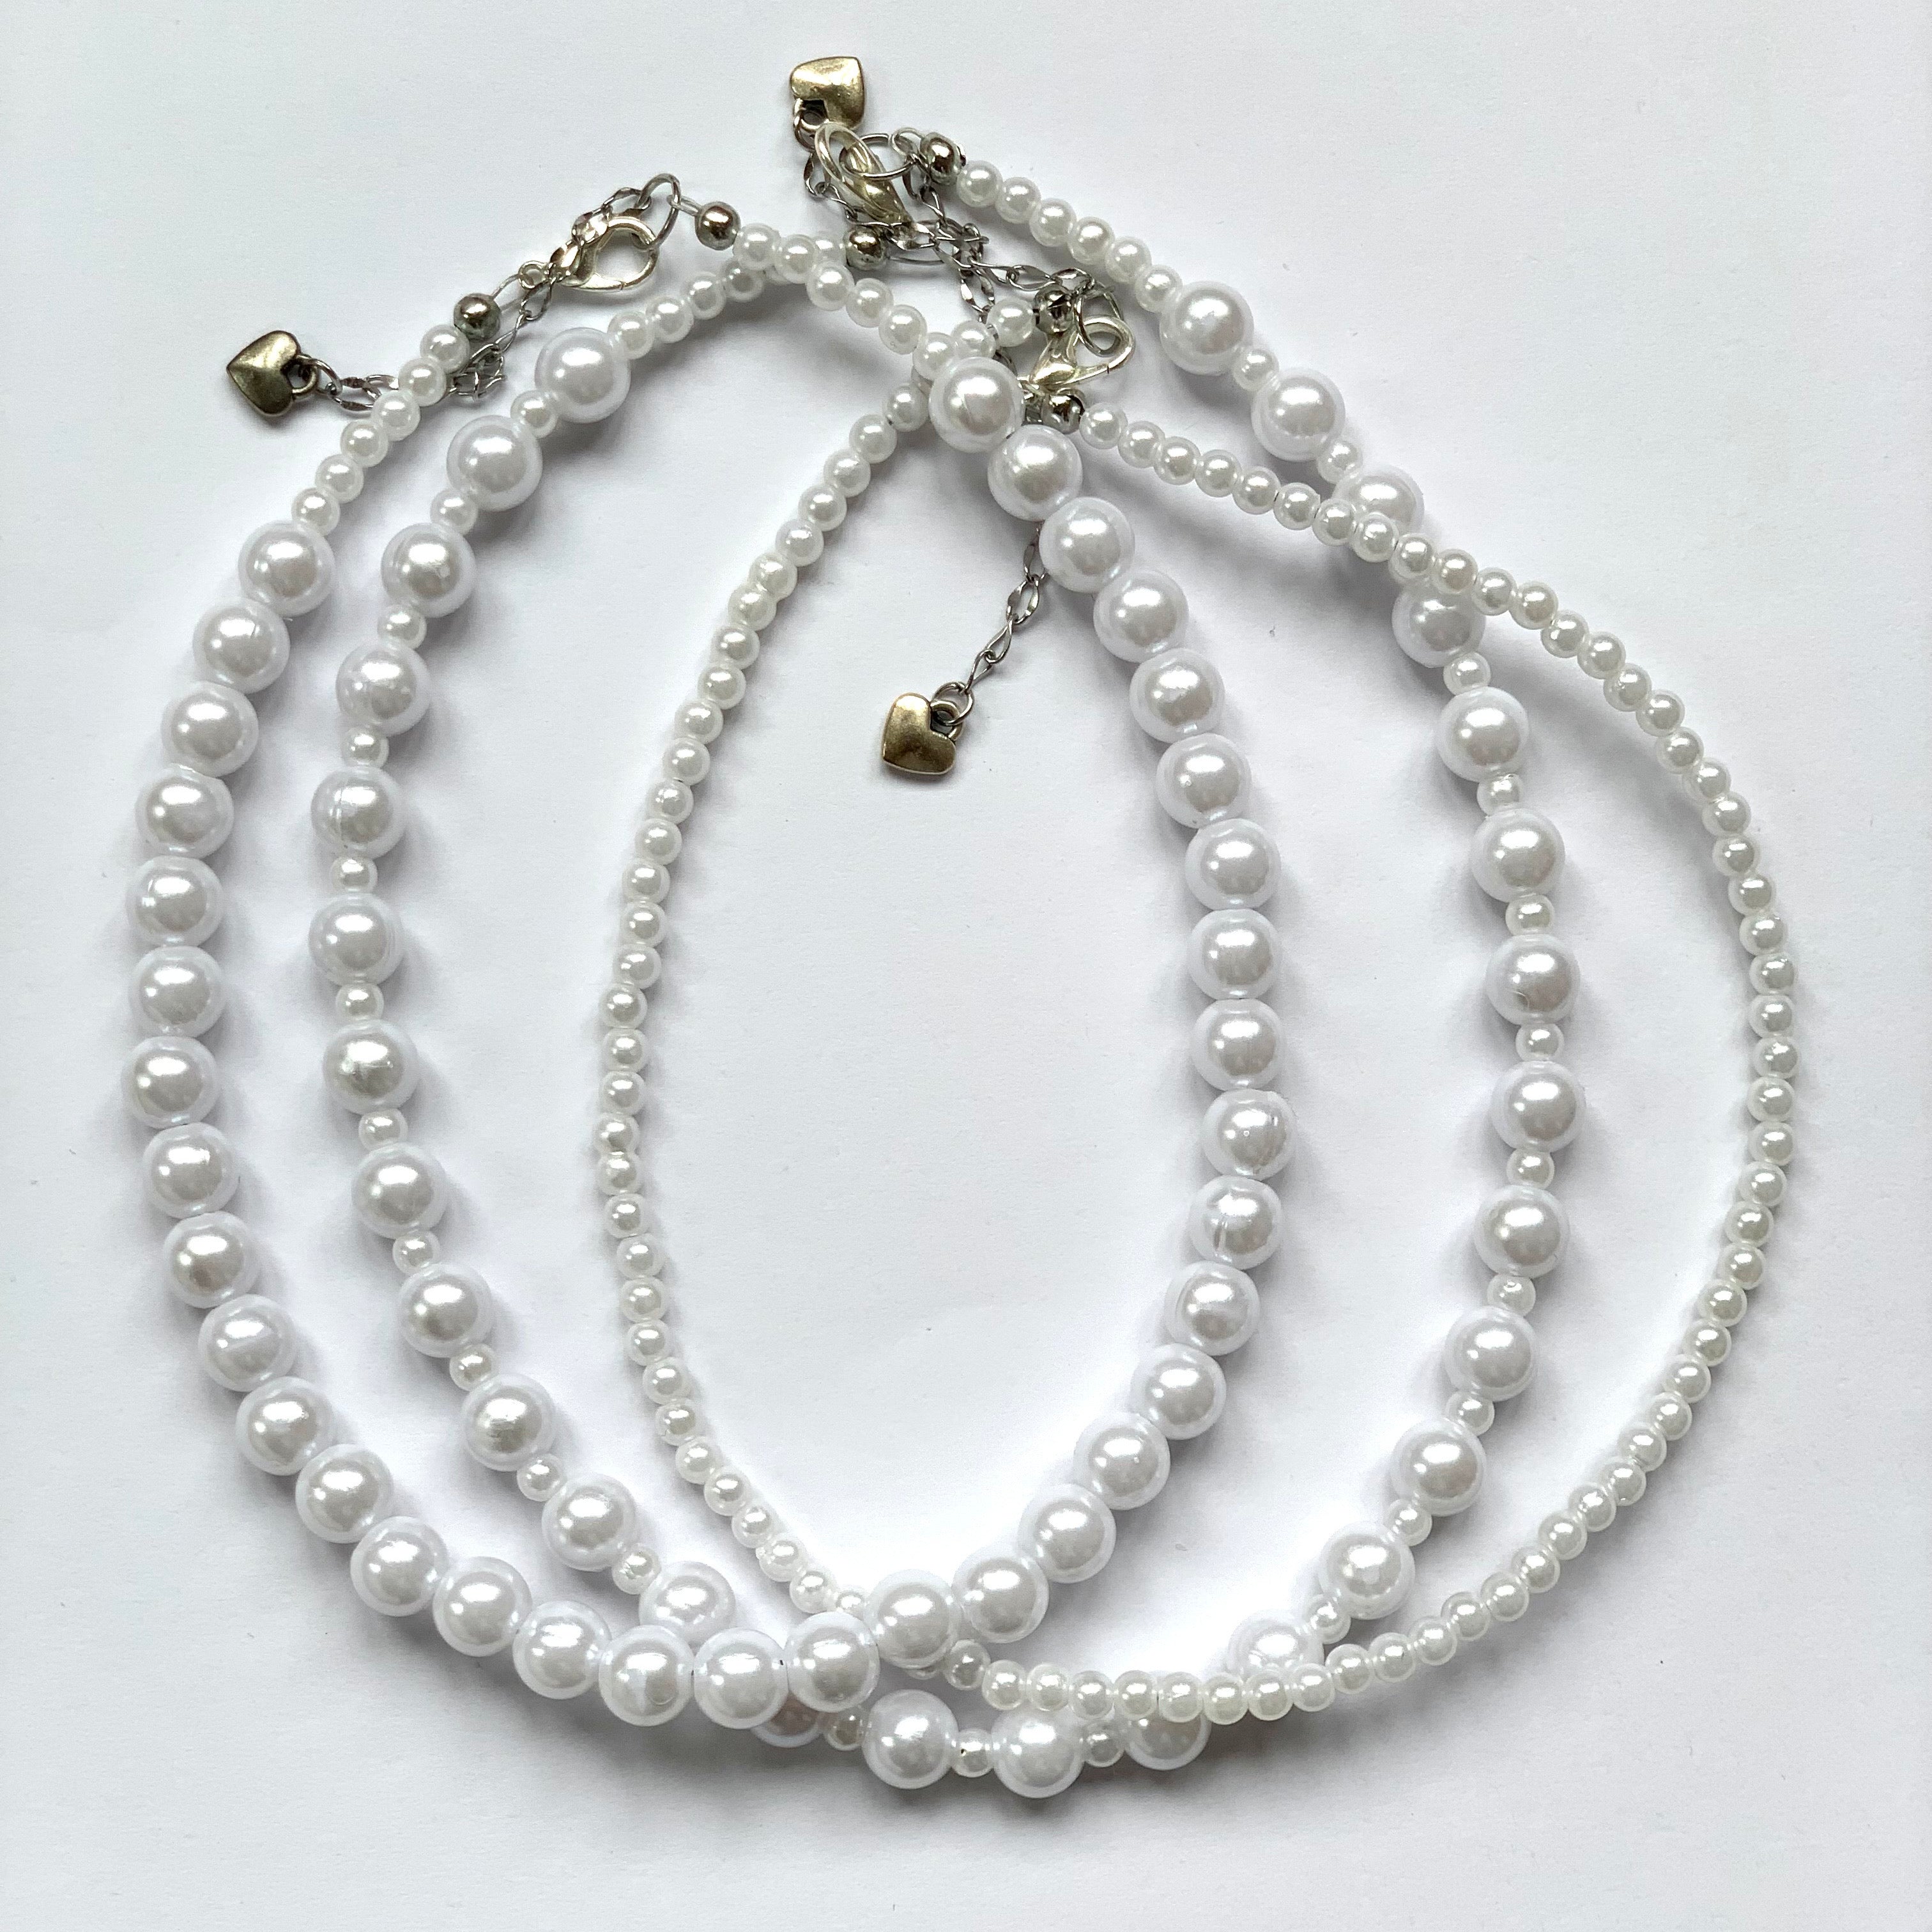 Vintage Large Faux Pearl Beaded Necklace A-8-26